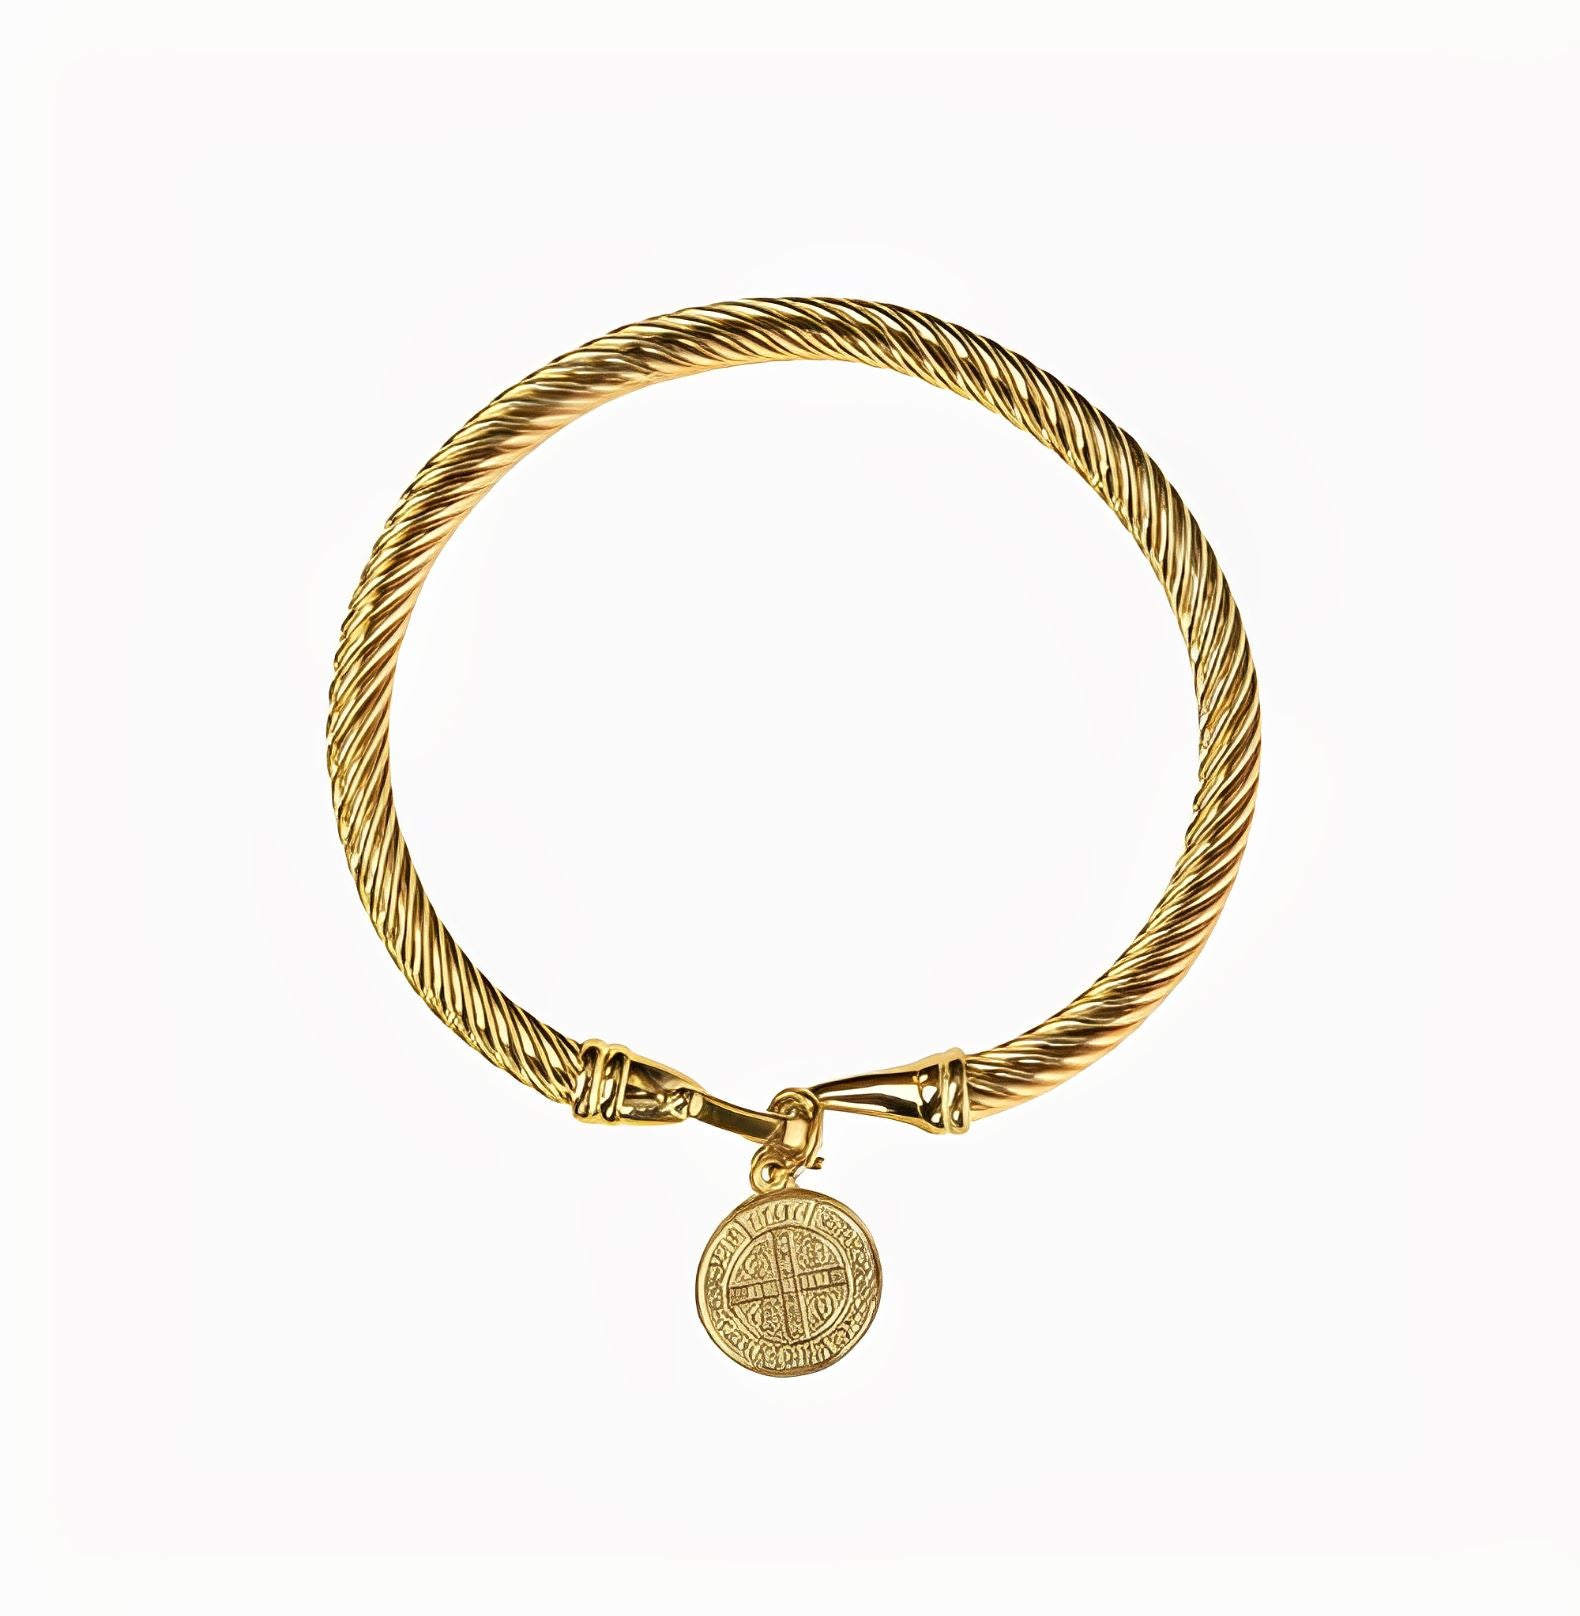 COIN BRACELET - GOLD braclet Yubama Jewelry Online Store - The Elegant Designs of Gold and Silver ! 